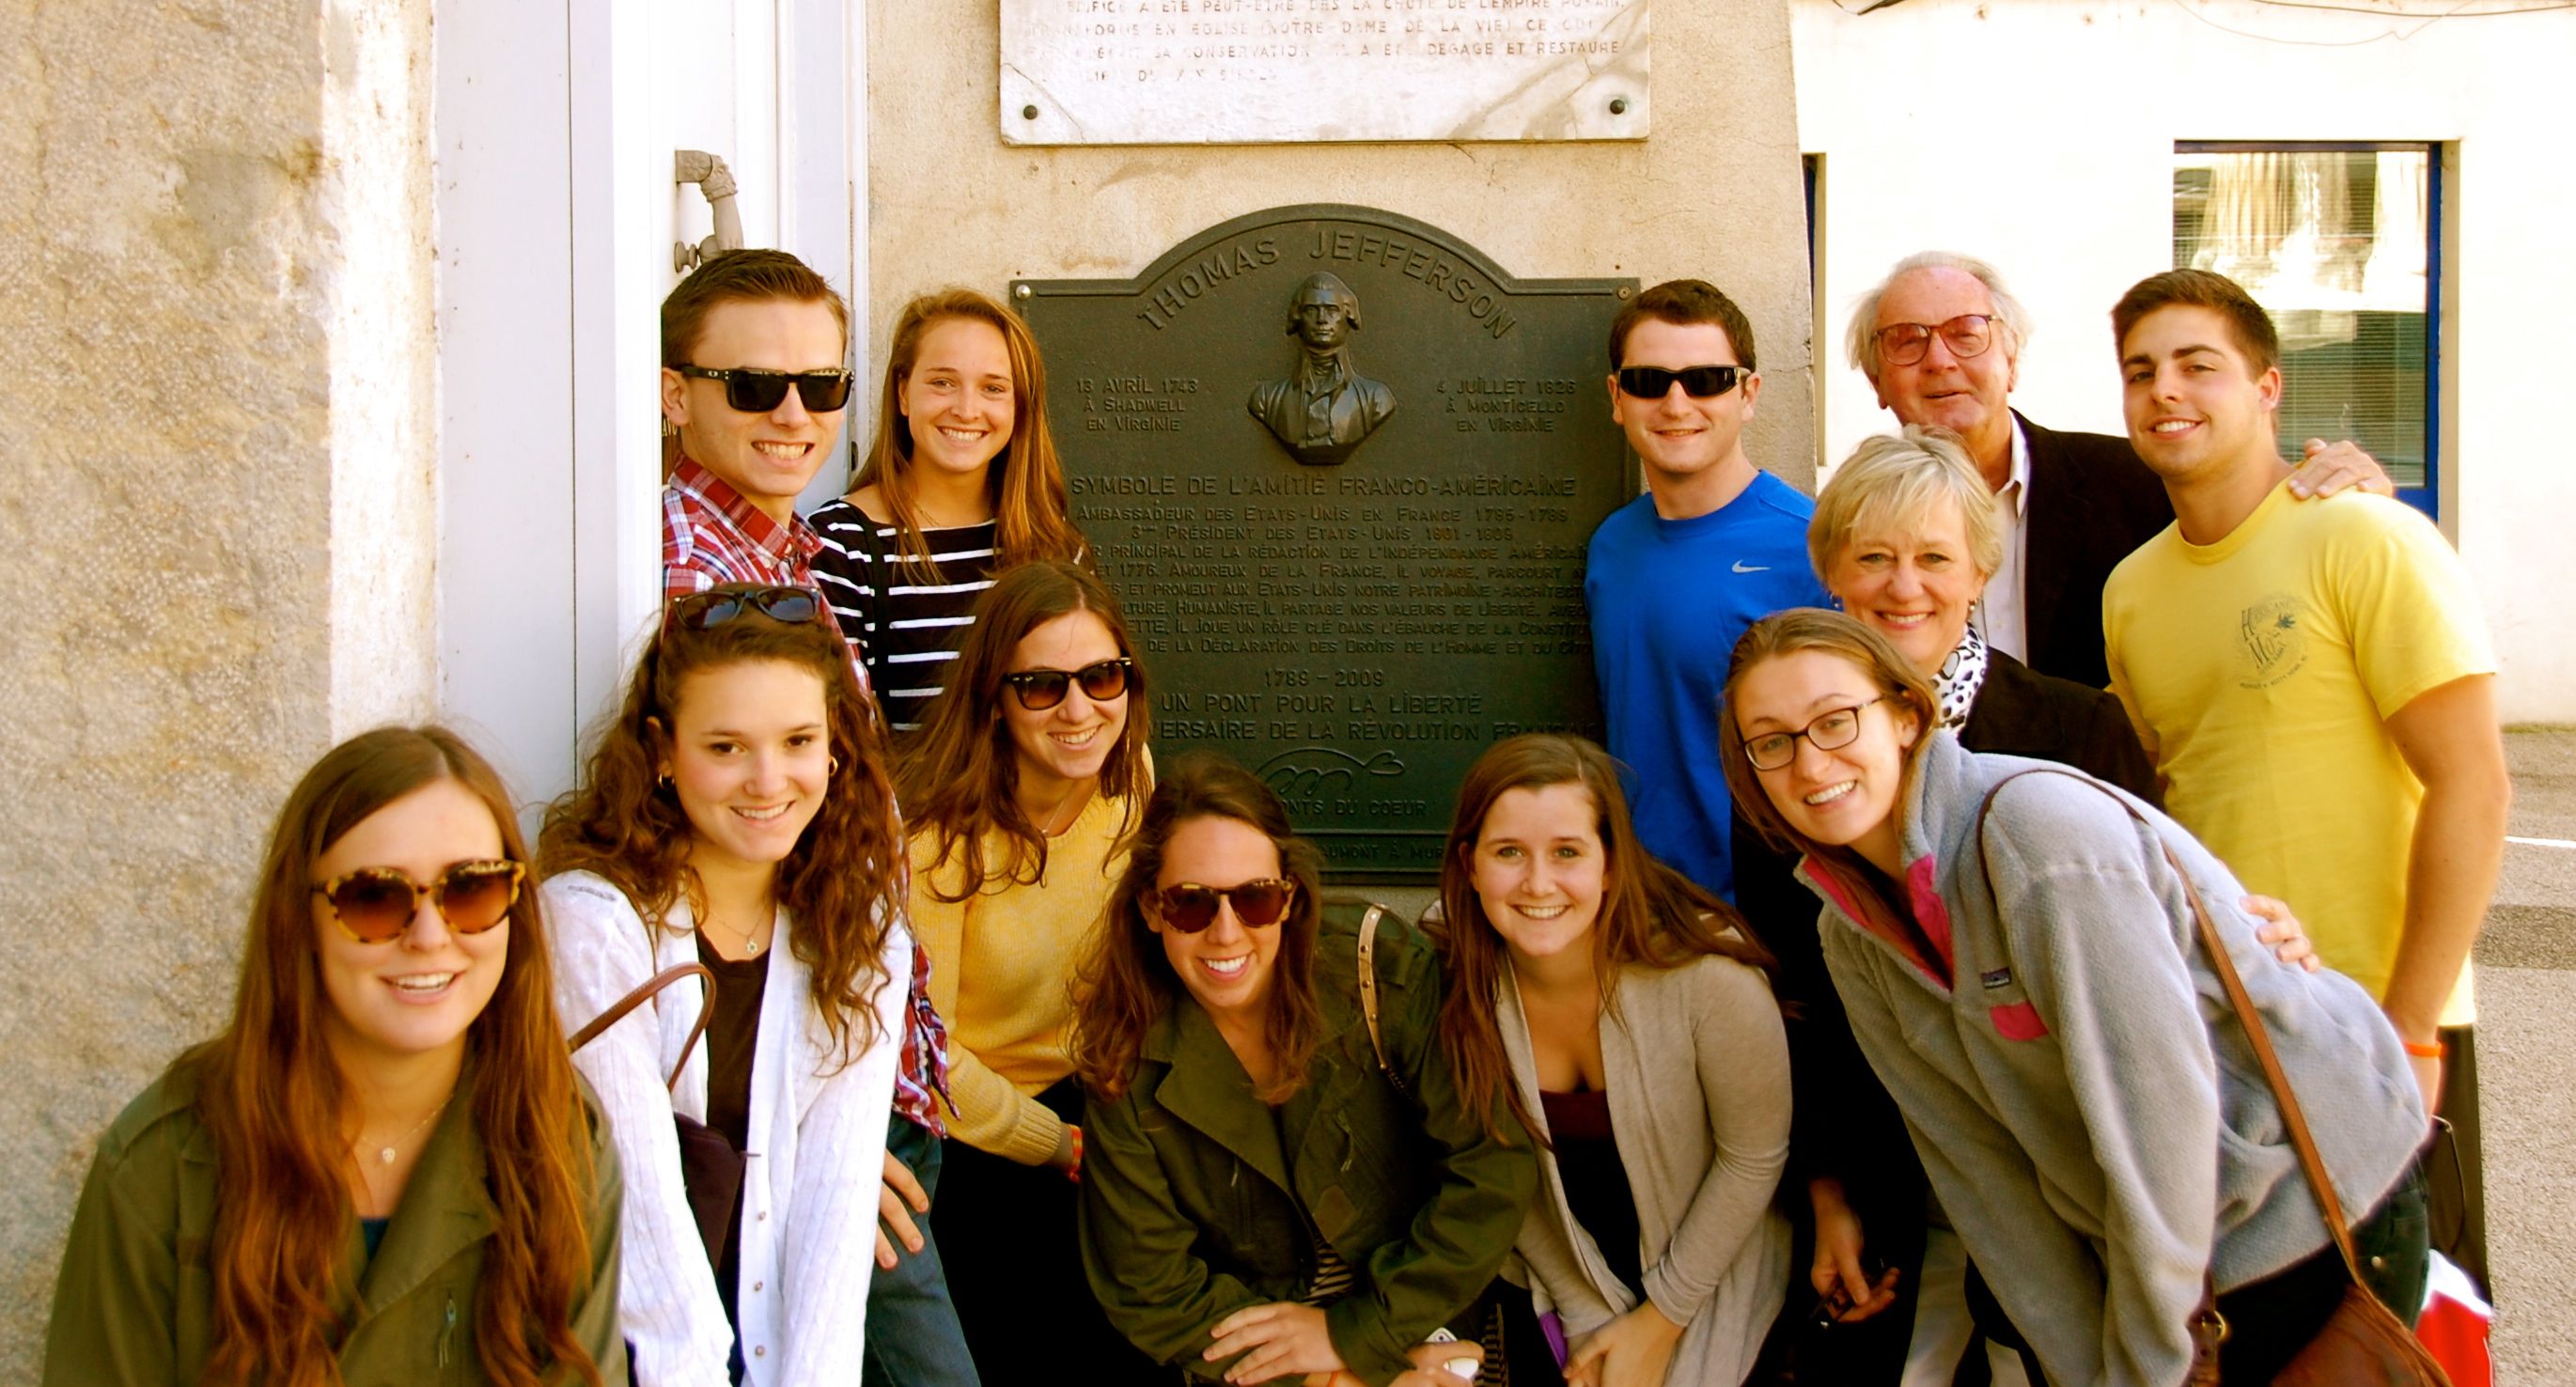 Group photo in front of a plaque dedicated to Thomas Jefferson